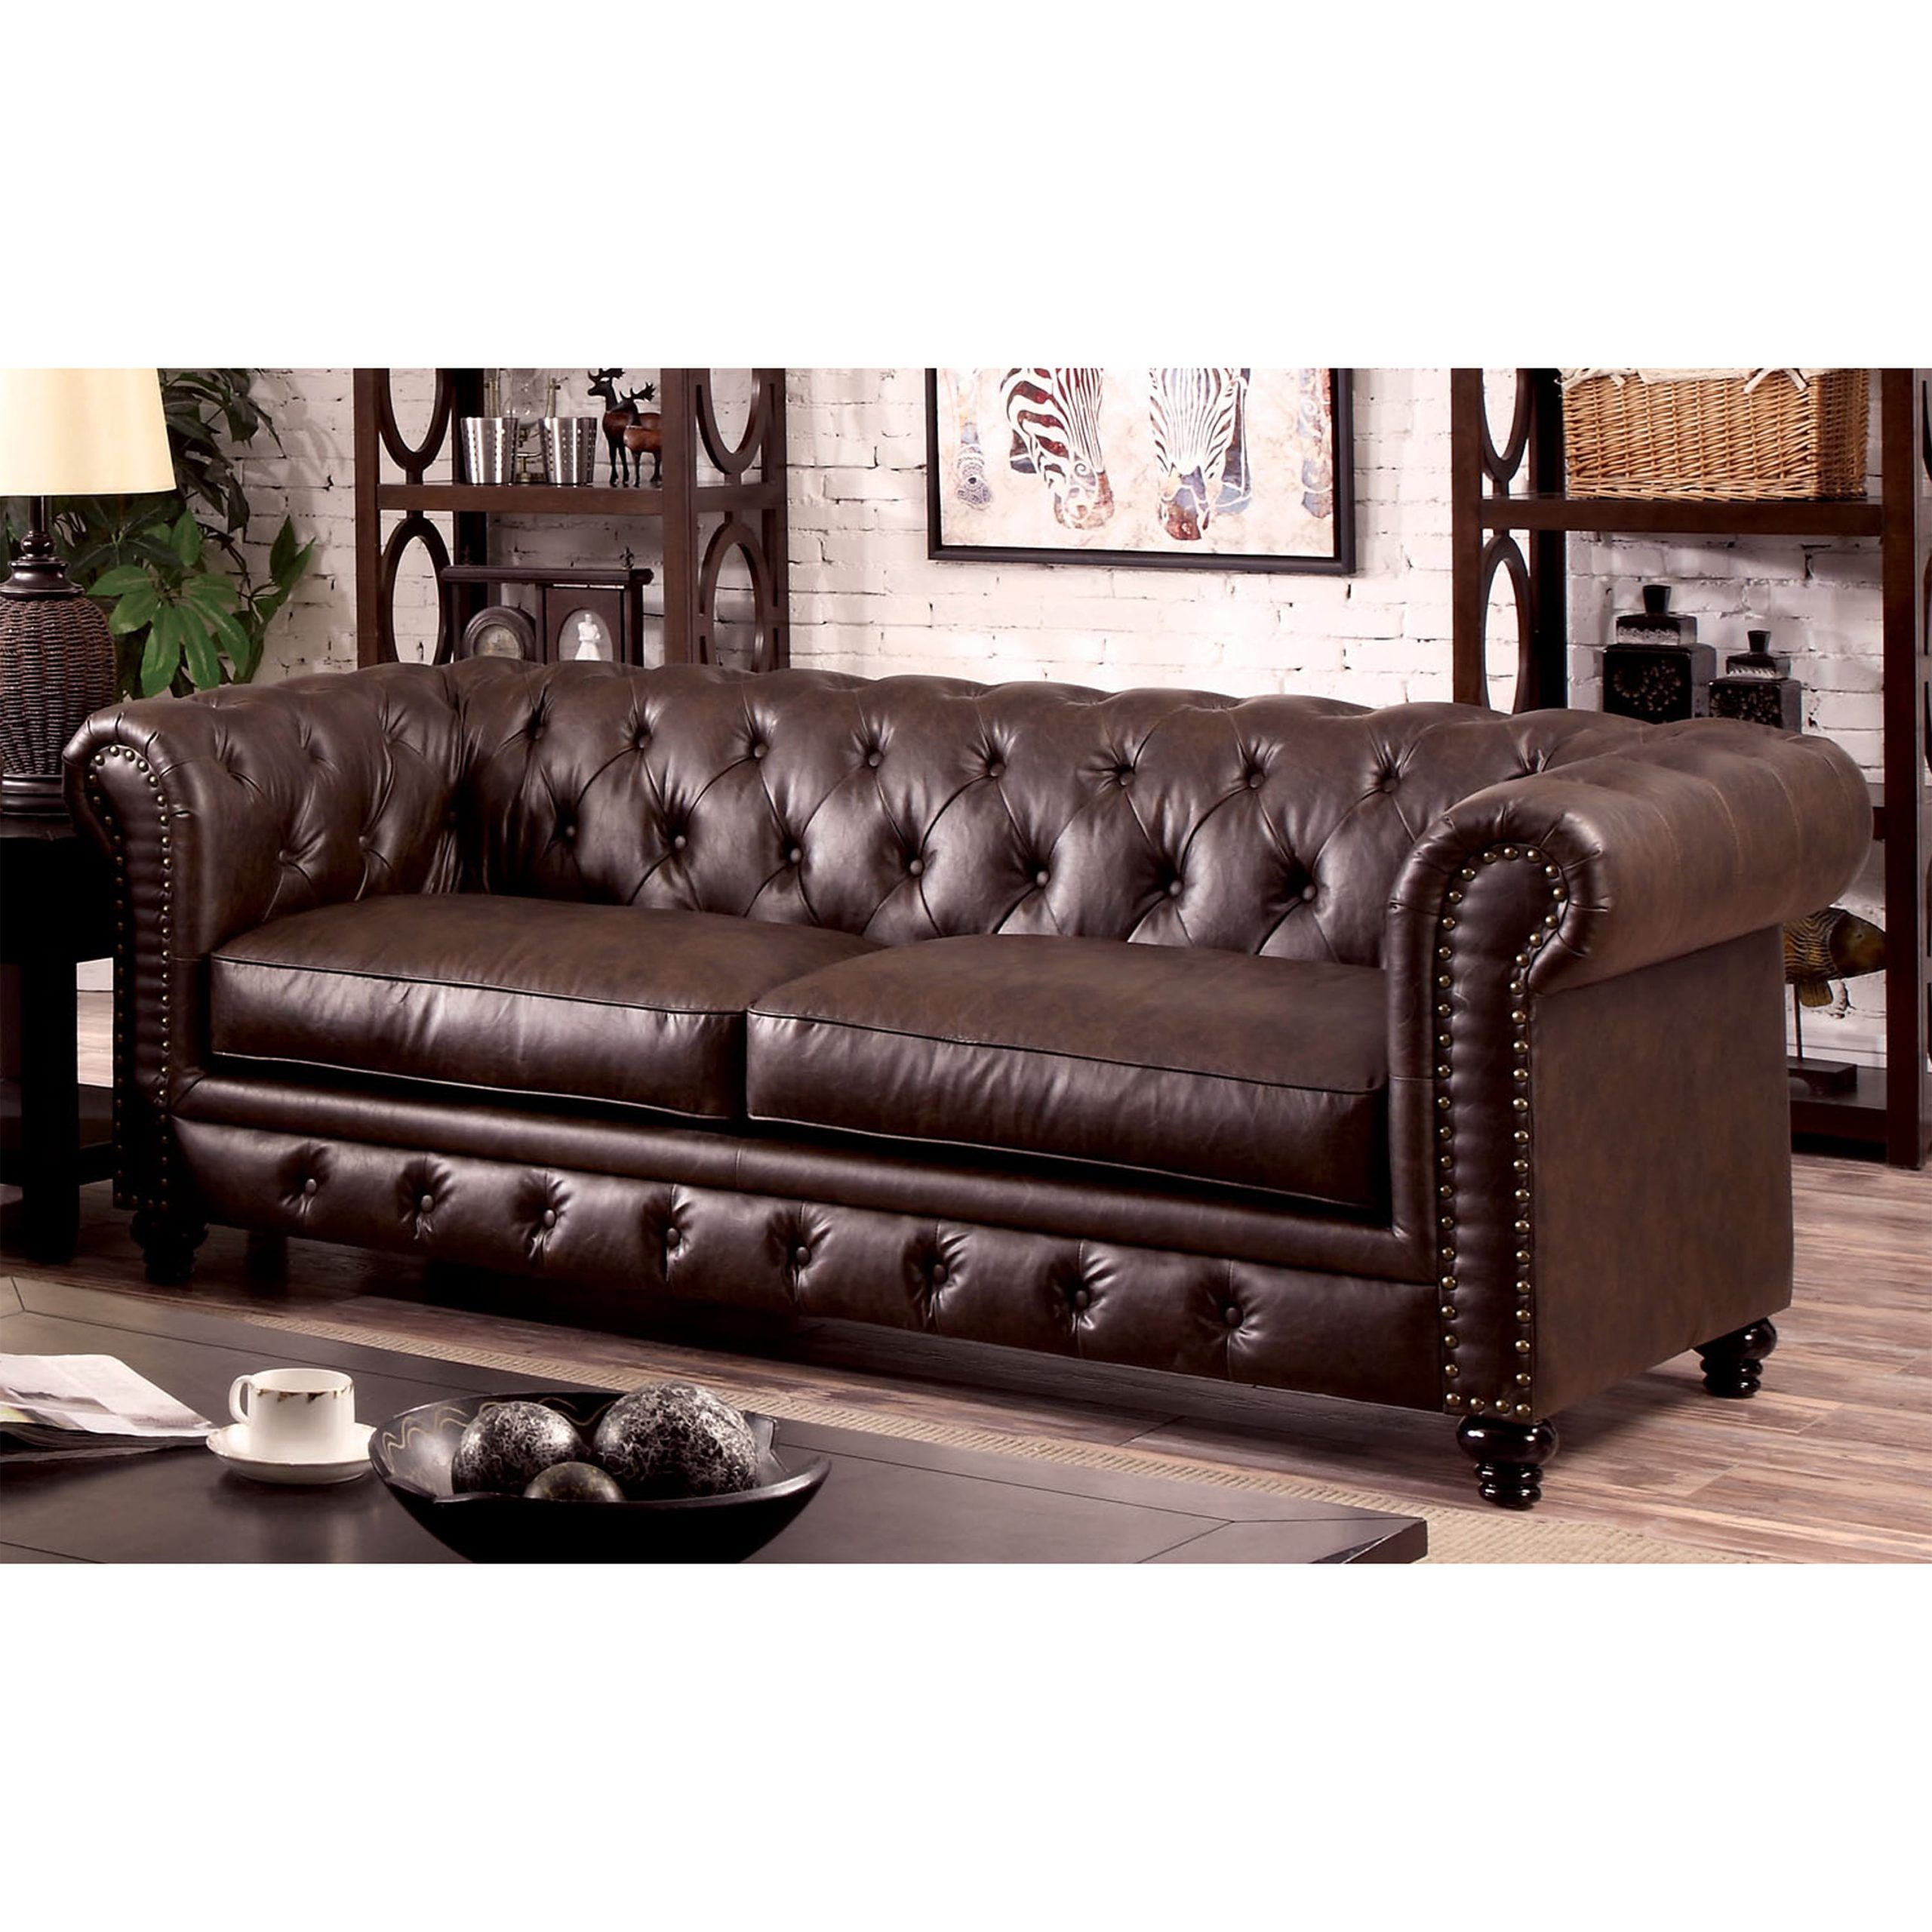 Furniture Of America Tufted Glam Faux Leather Nyssa Tuxedo Sofa, Brown Inside Faux Leather Sofas In Chocolate Brown (View 12 of 20)